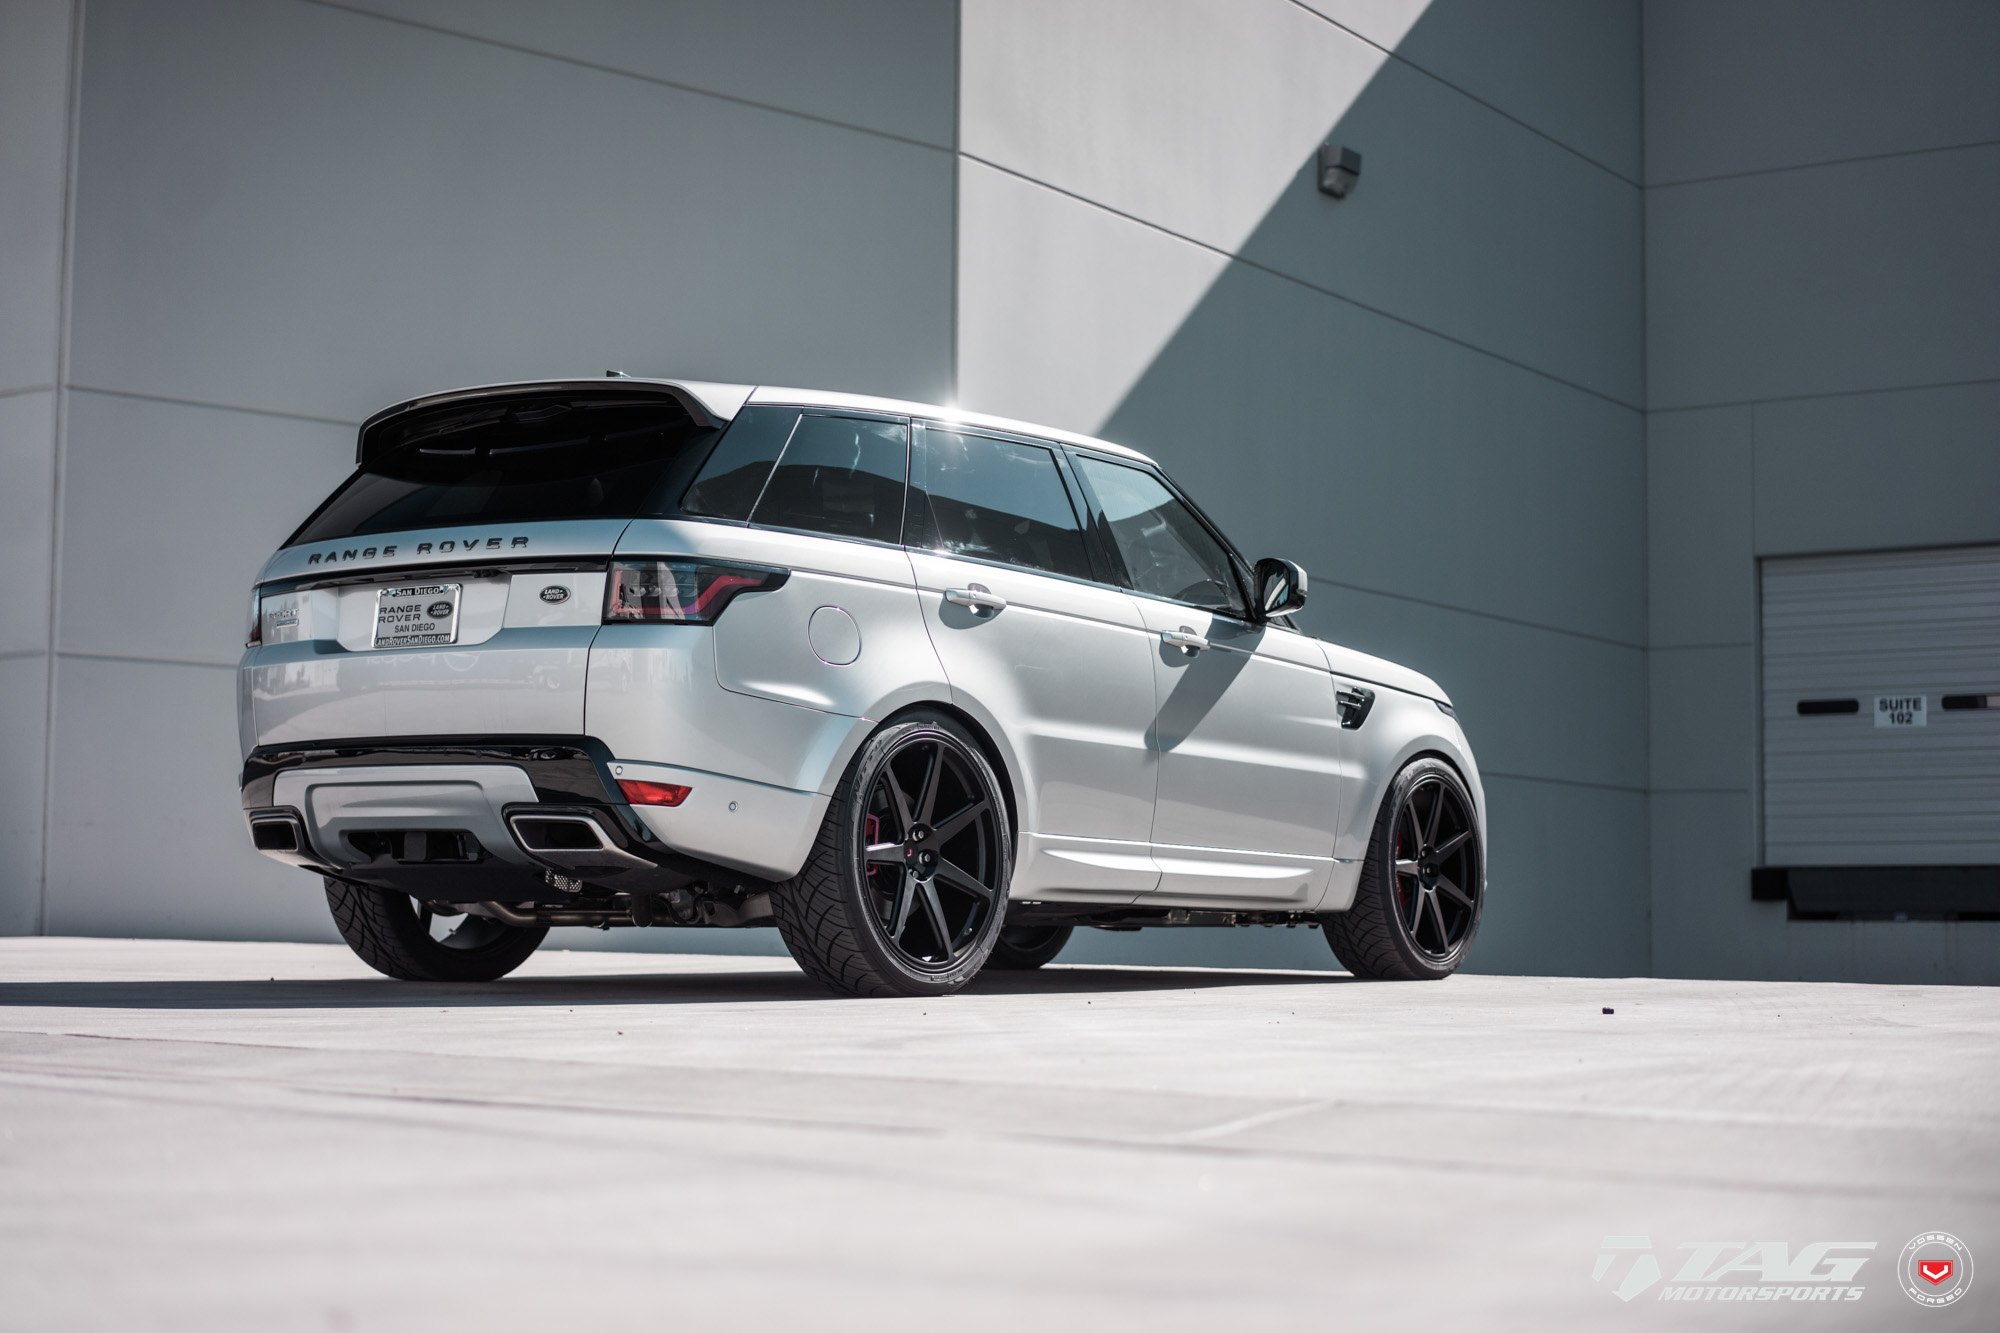 White Range Rover Sport with Custom Rear Diffuser - Photo by Vossen Wheels